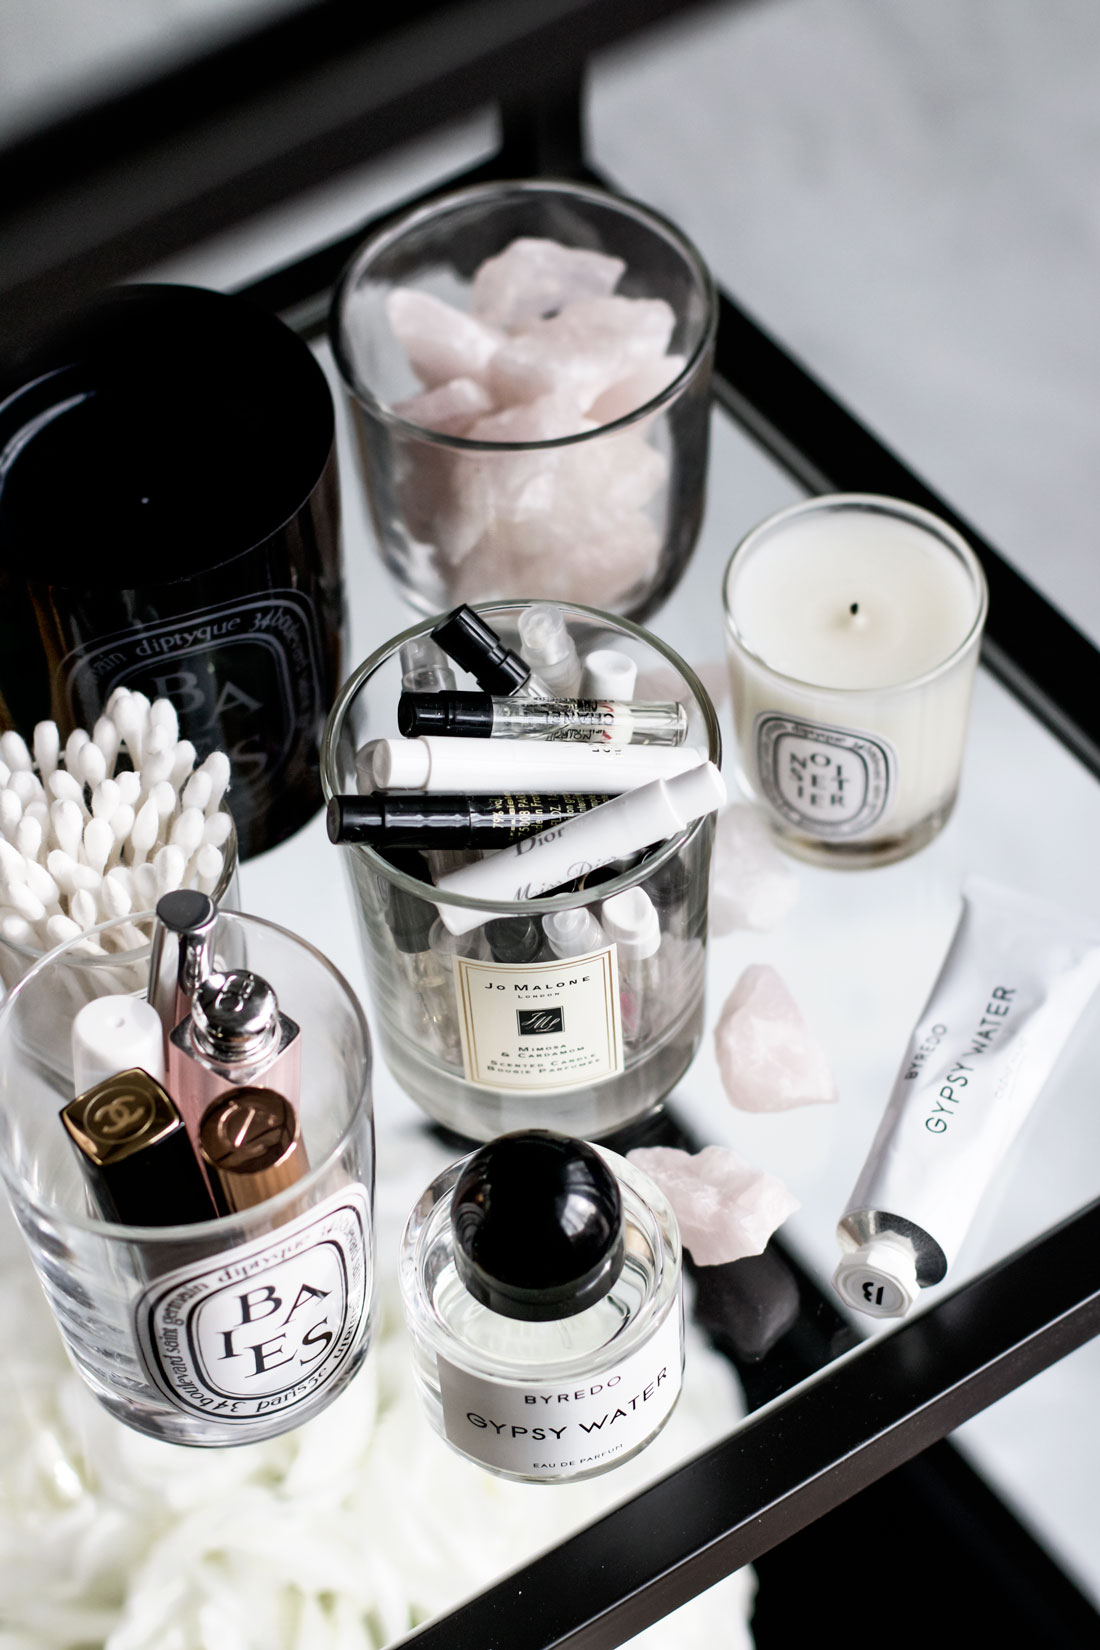 How To Style Your Vanity